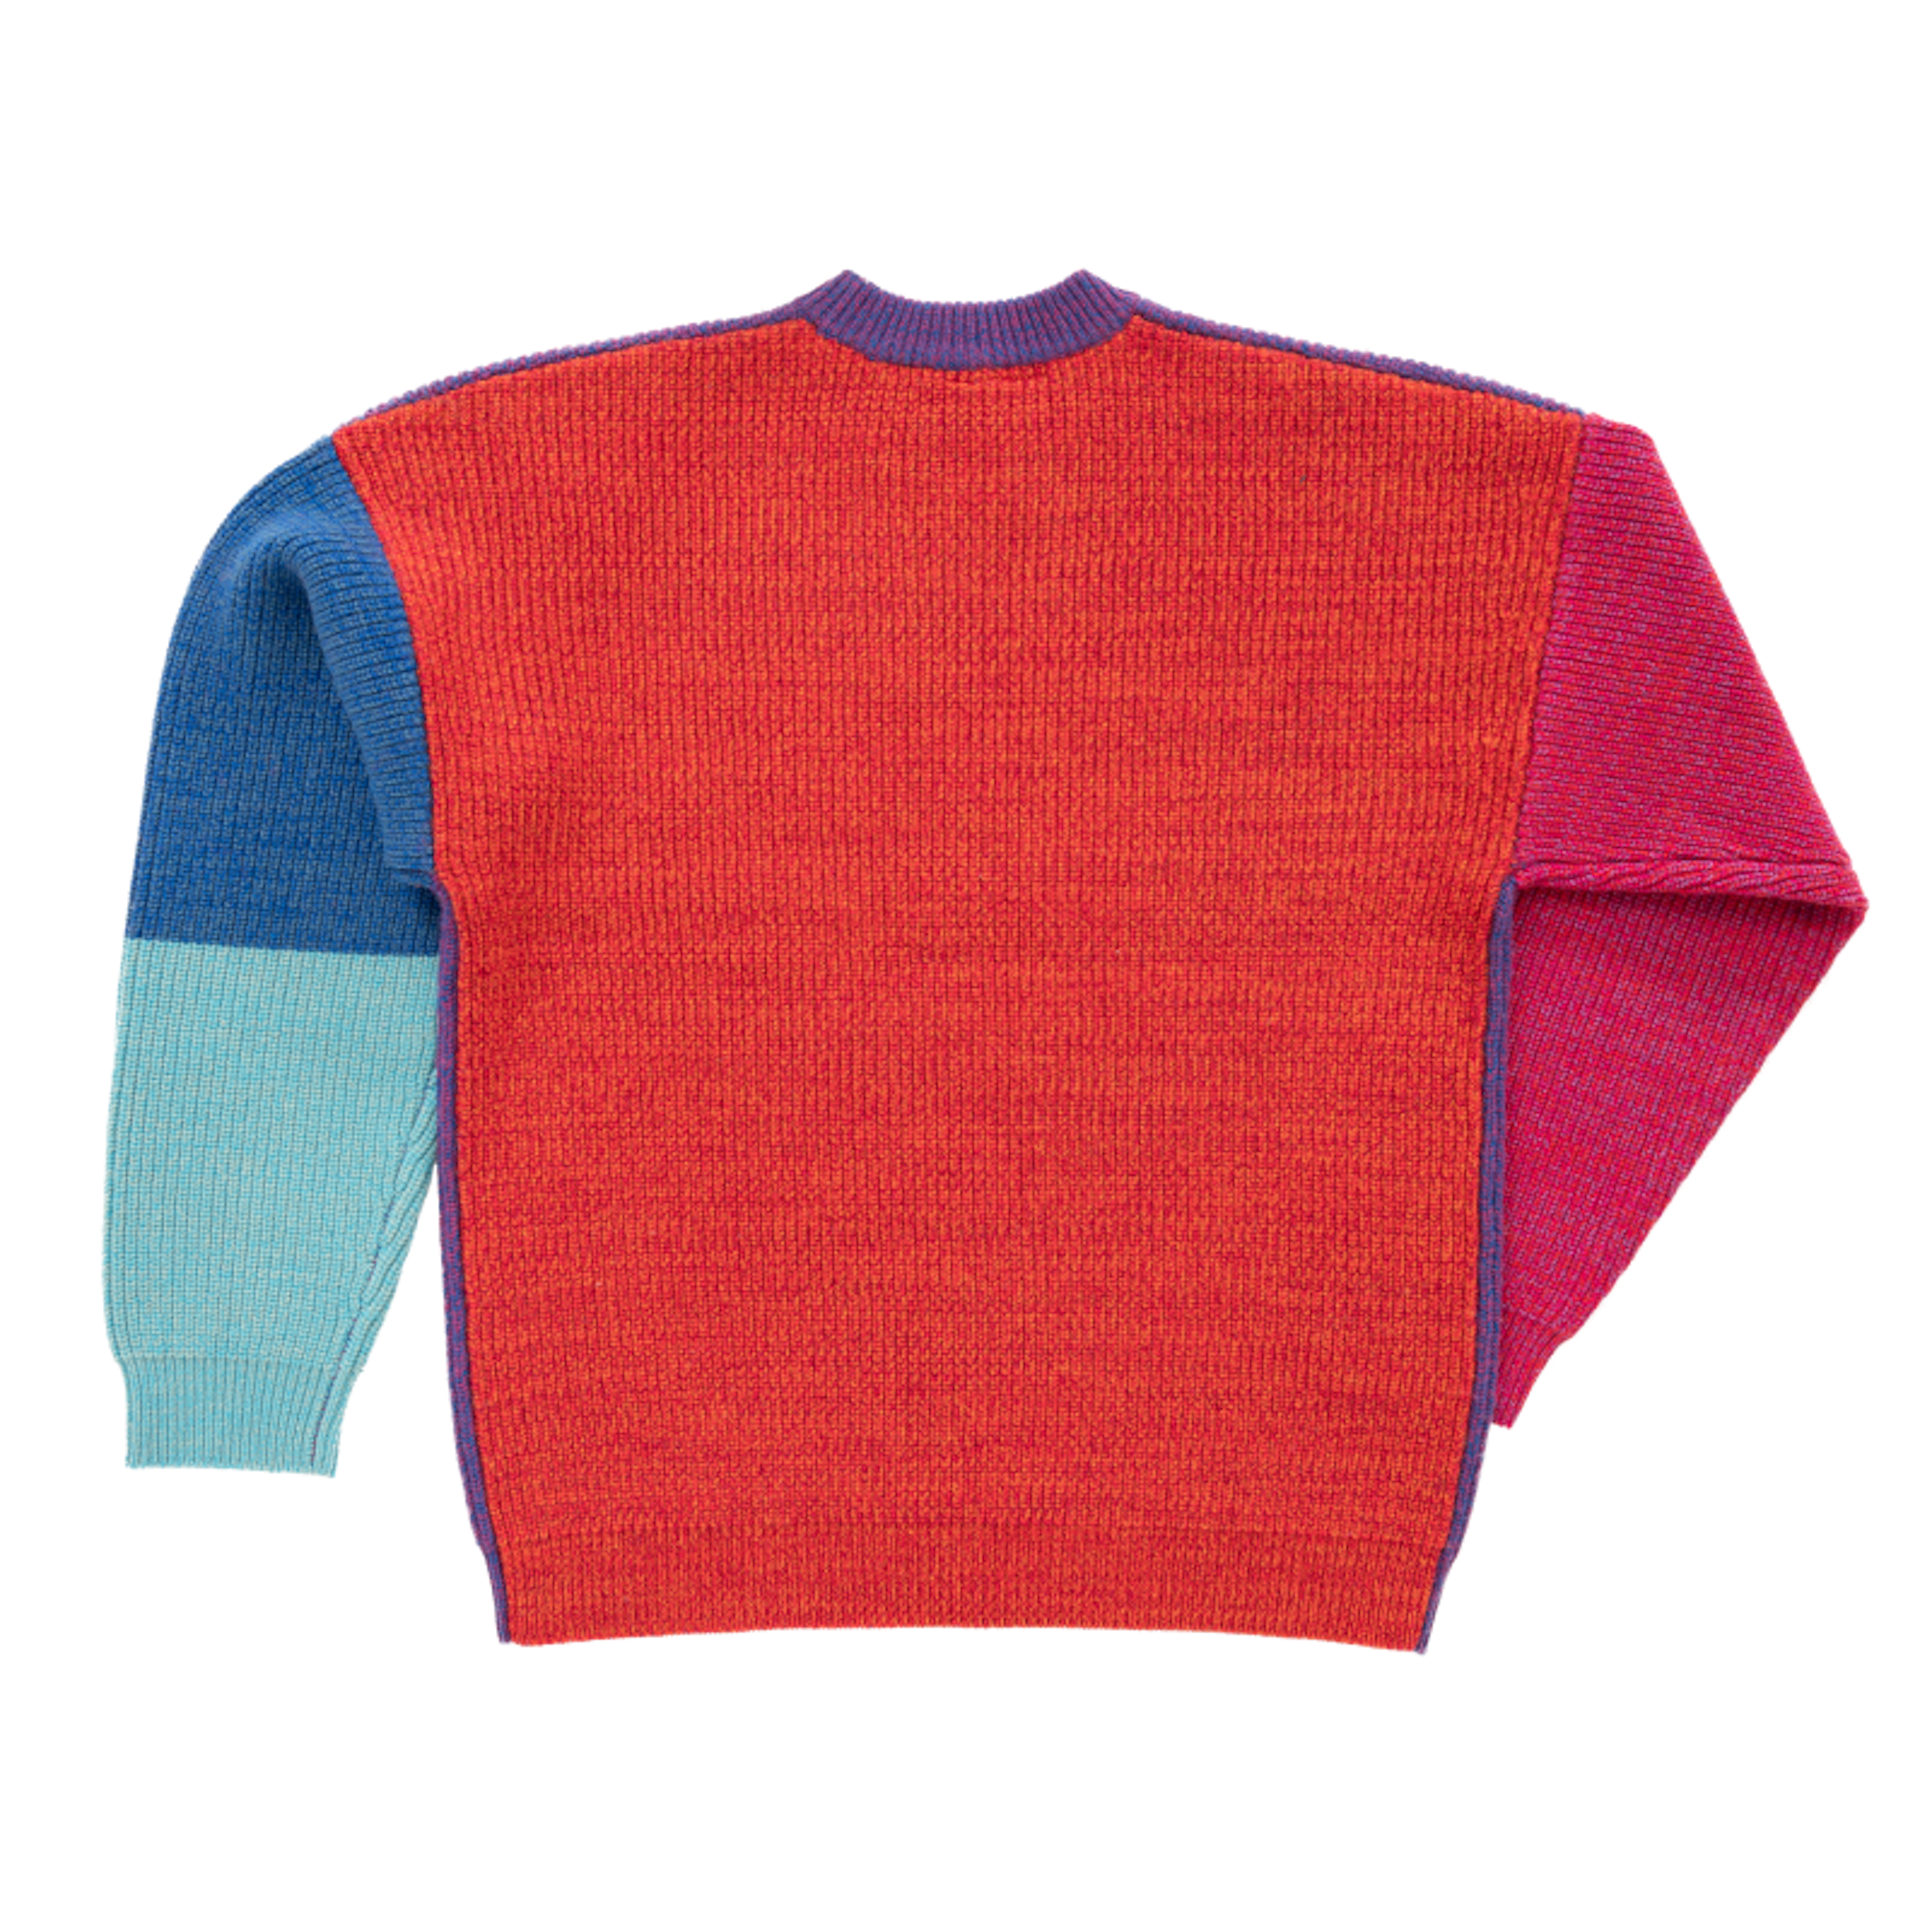 Generated Odd Sweater based on Chromie Squiggle #9700